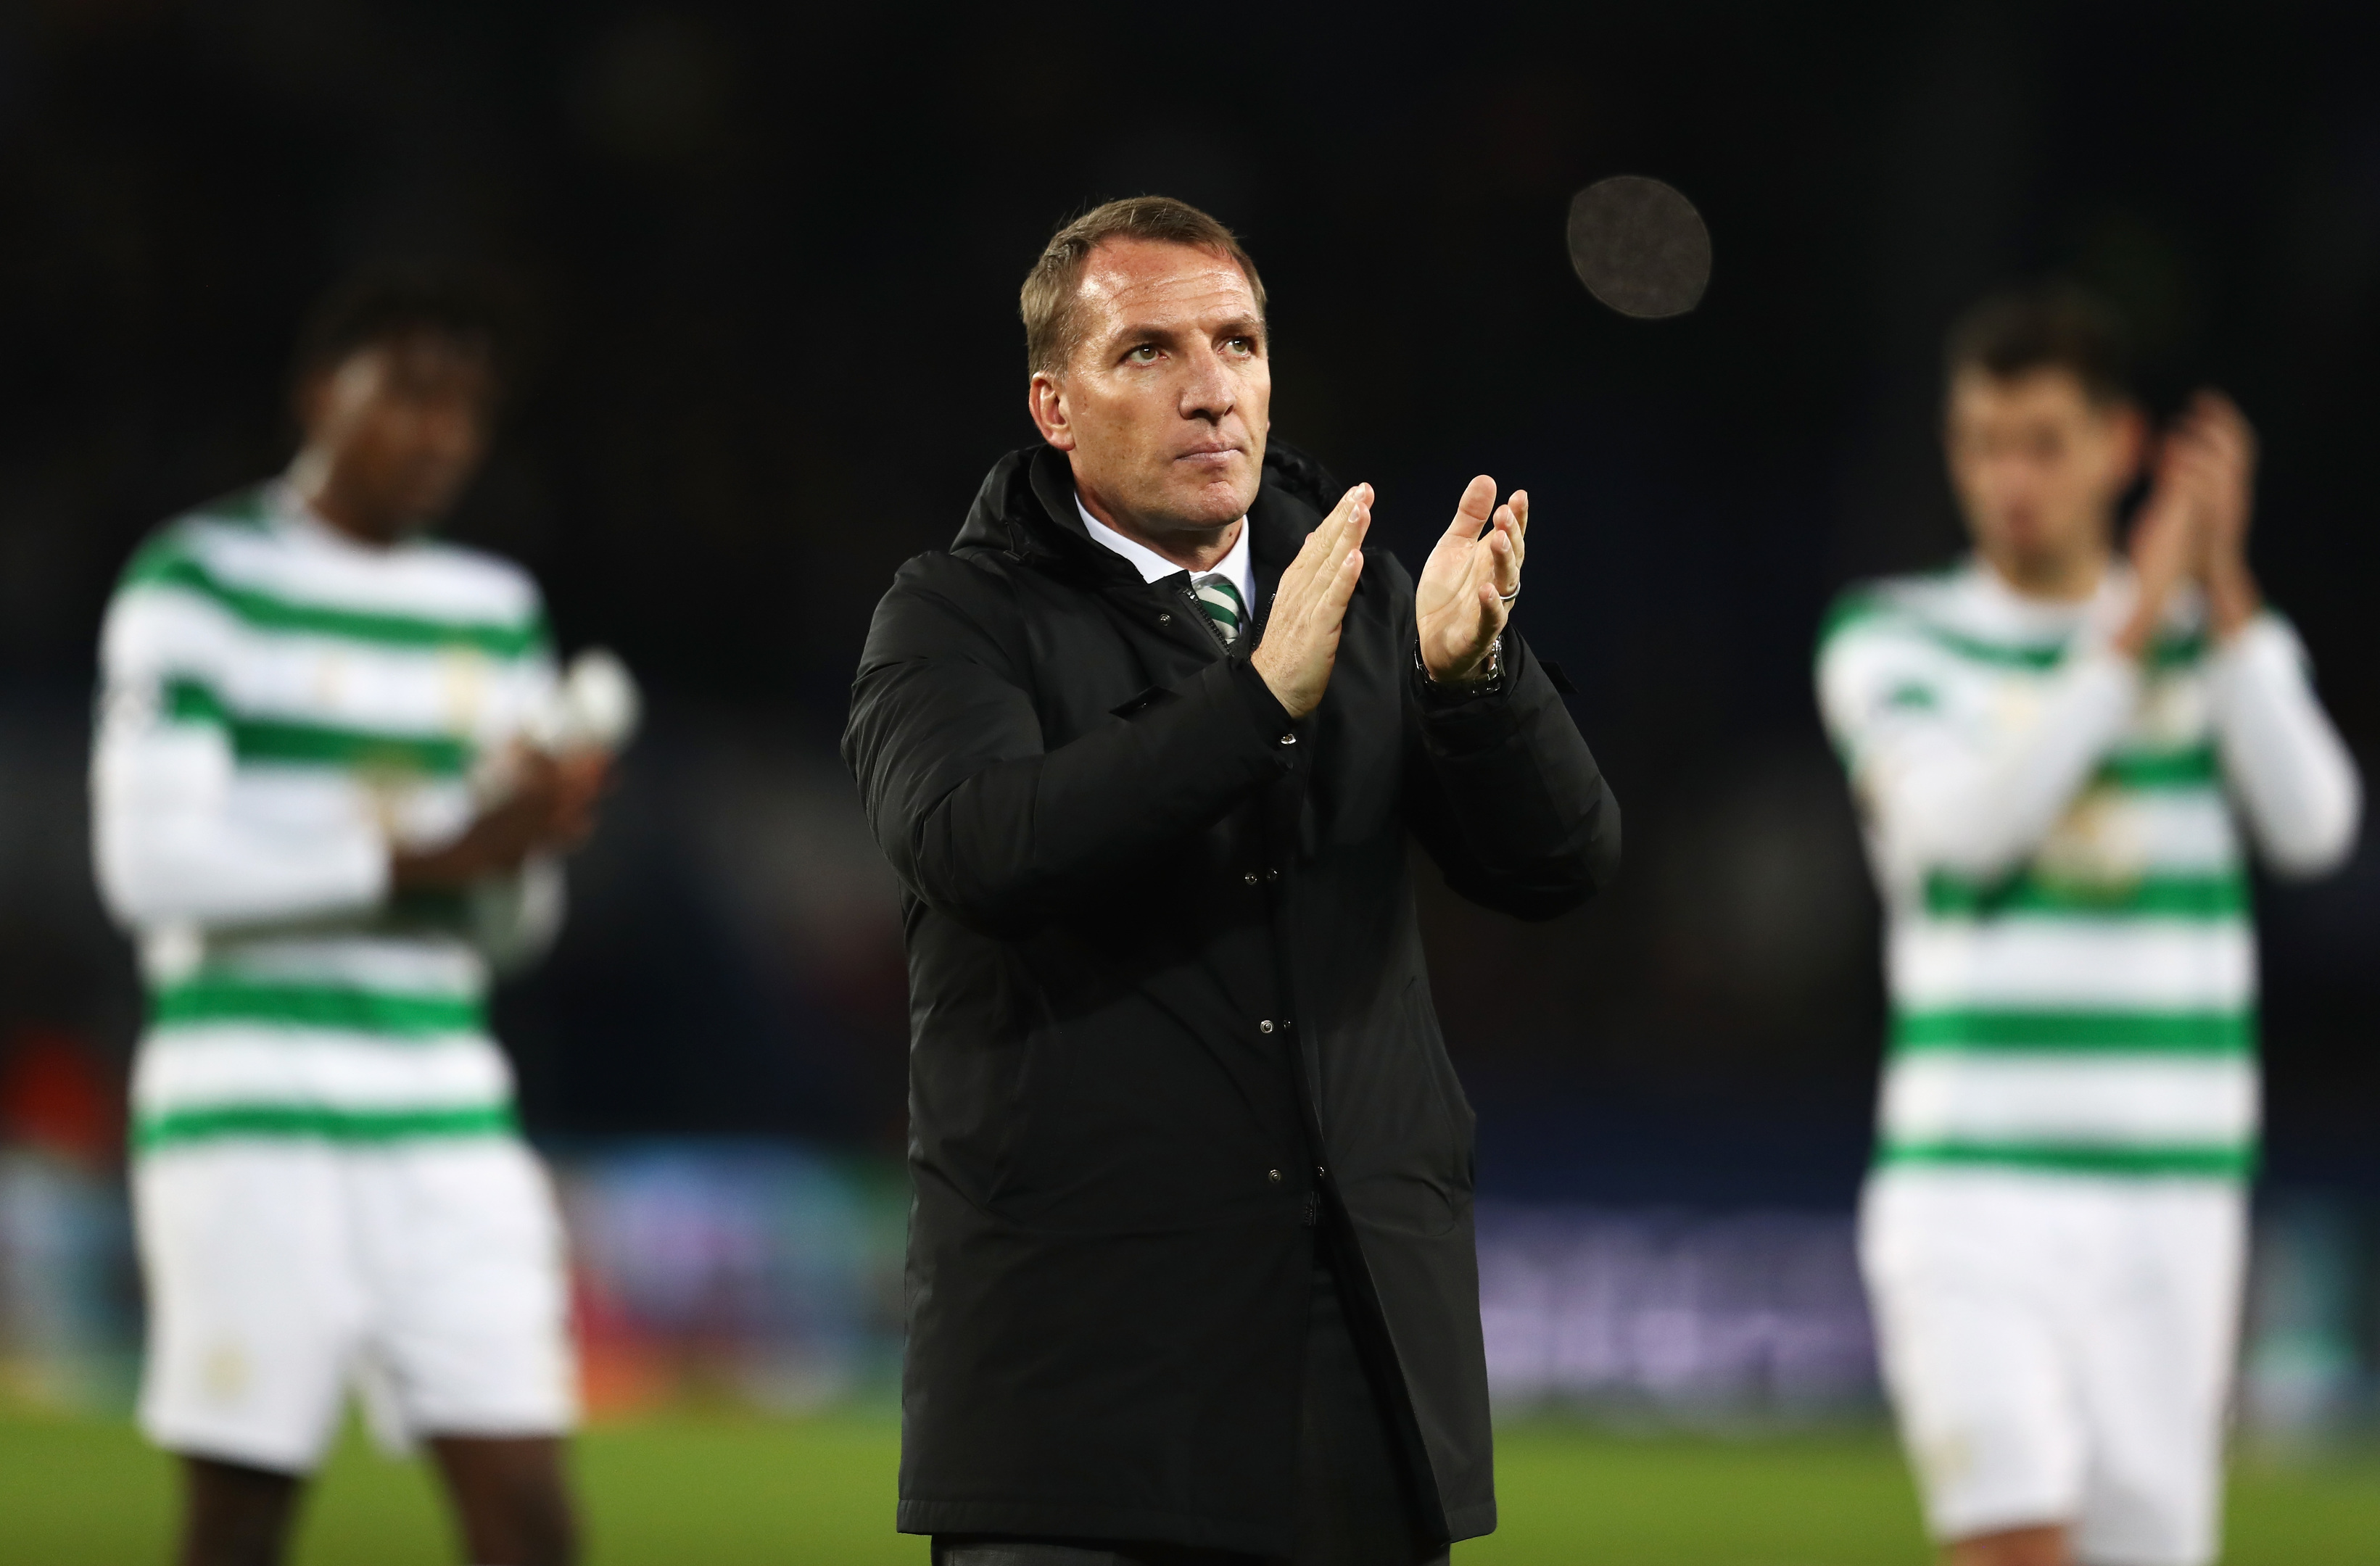 Brendan Rodgers applauds the fans (Catherine Ivill/Getty Images)